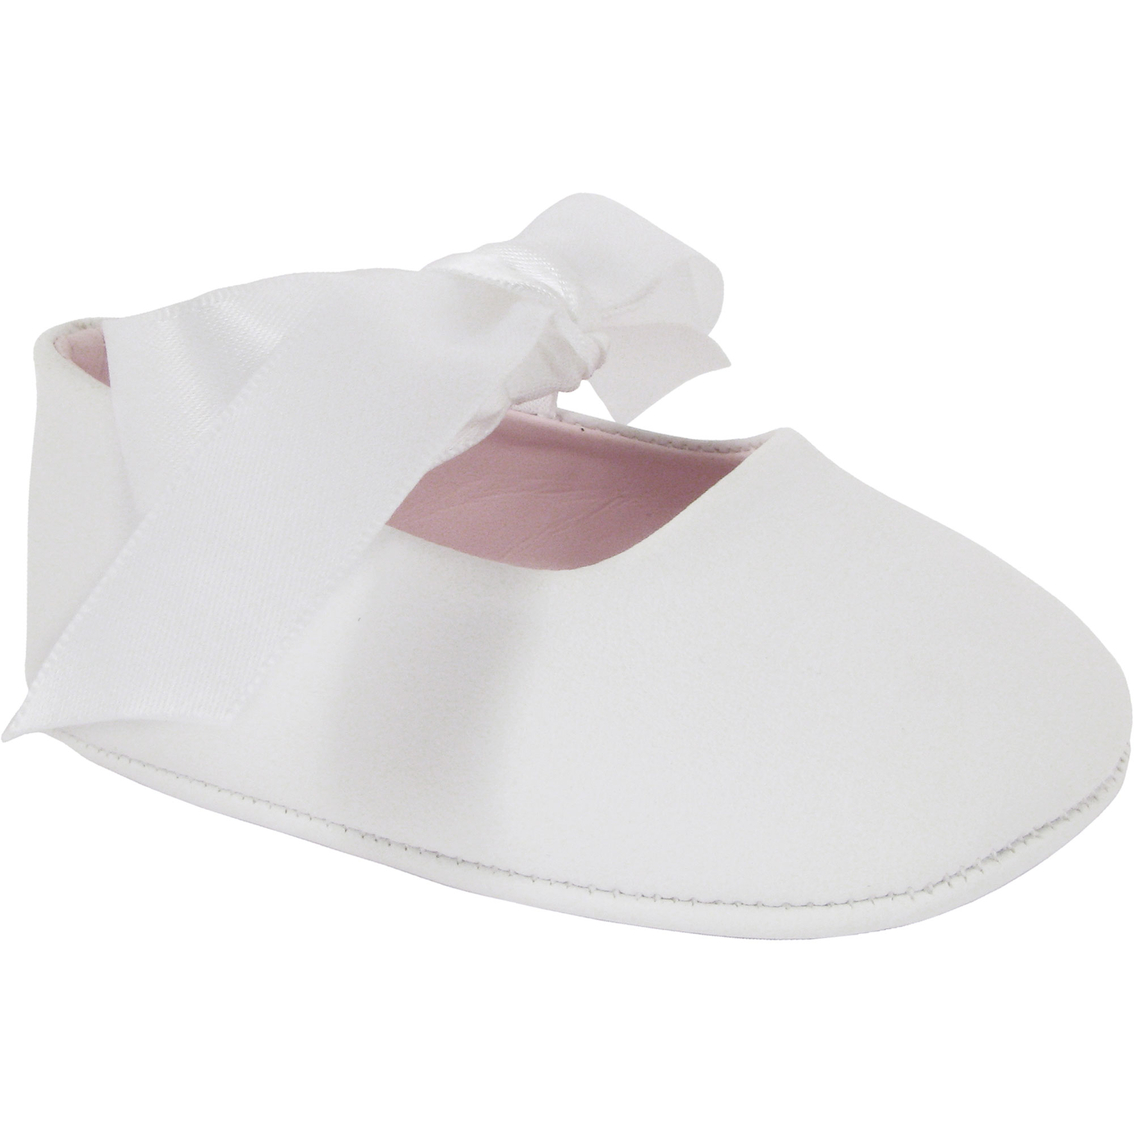 Wee Kids Infant Girls Ballet Shoes With 